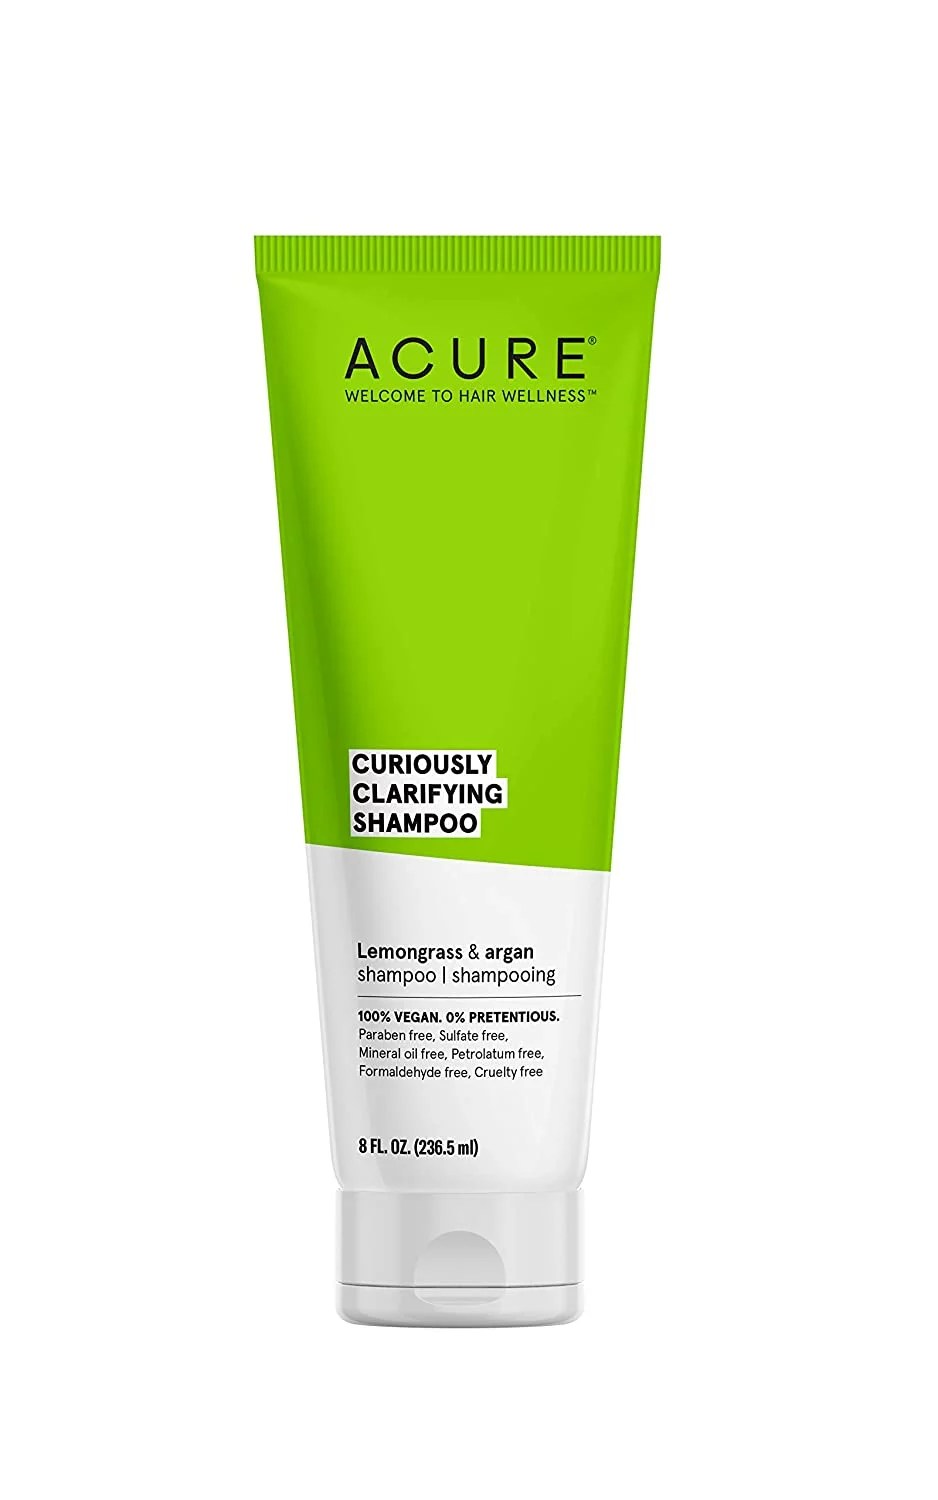 A bottle of ACURE Curiously Clarifying Shampoo.